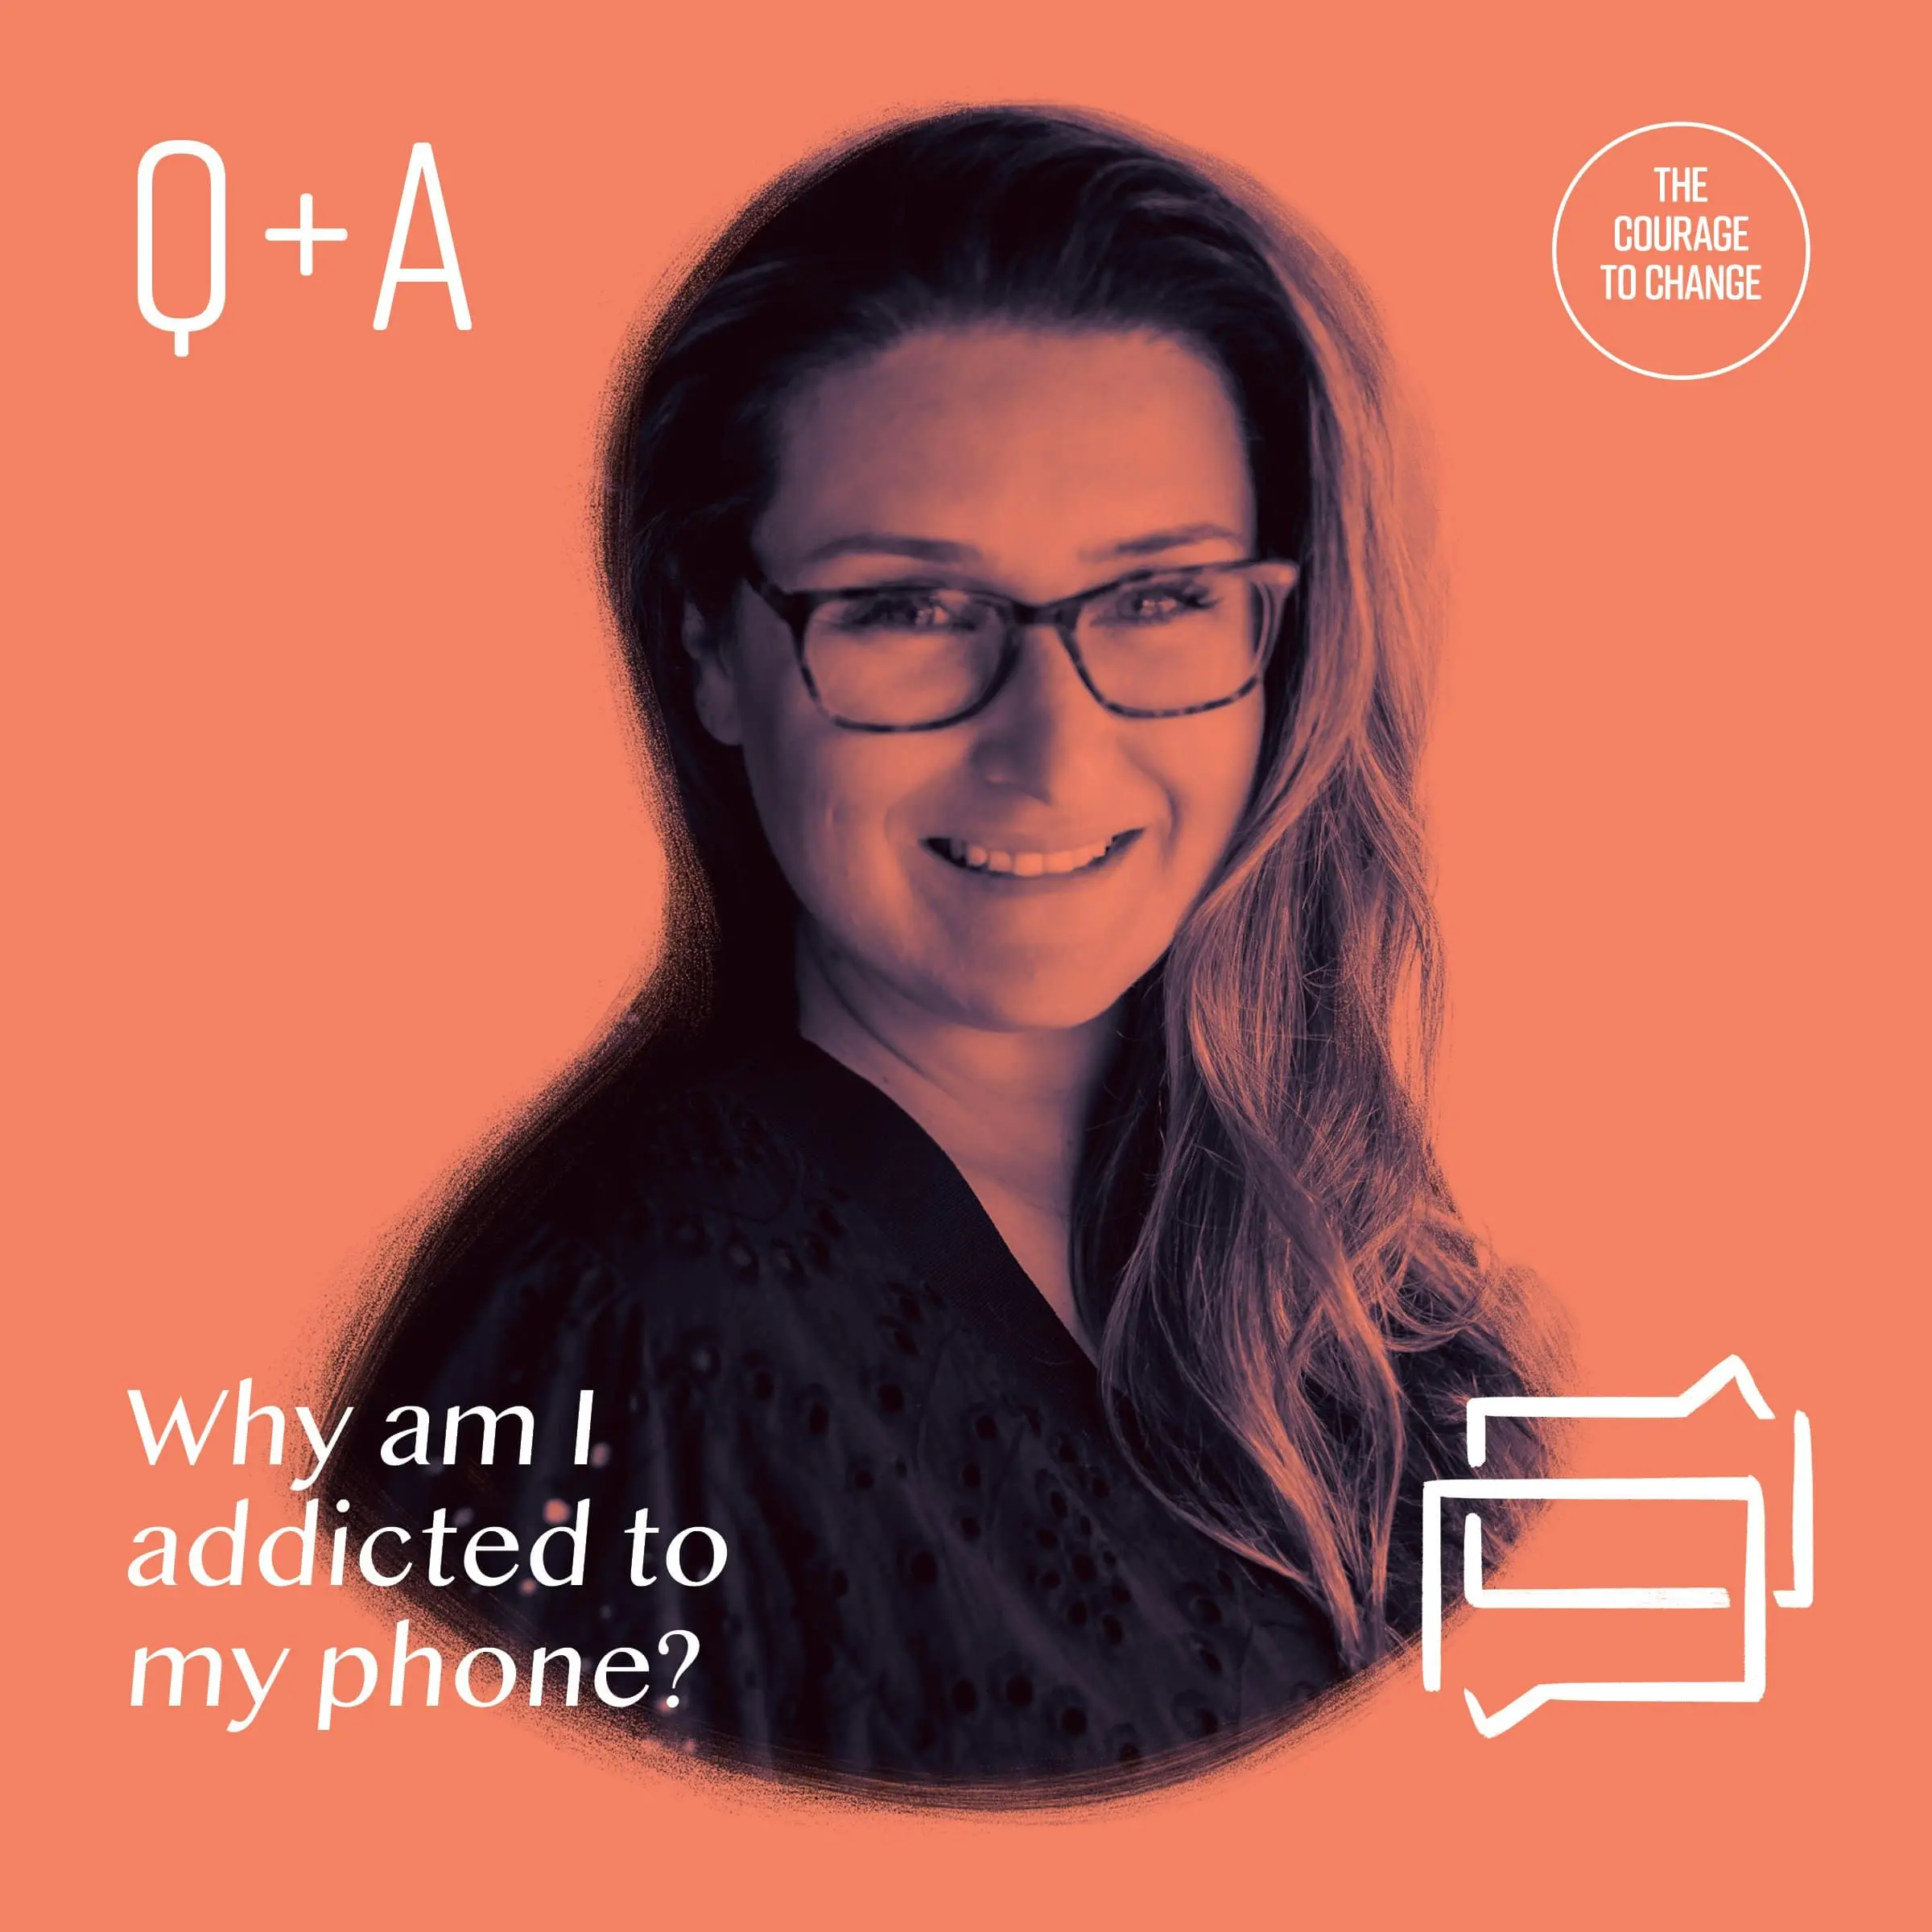 Q+A Why Am I Addicted to My Phone?